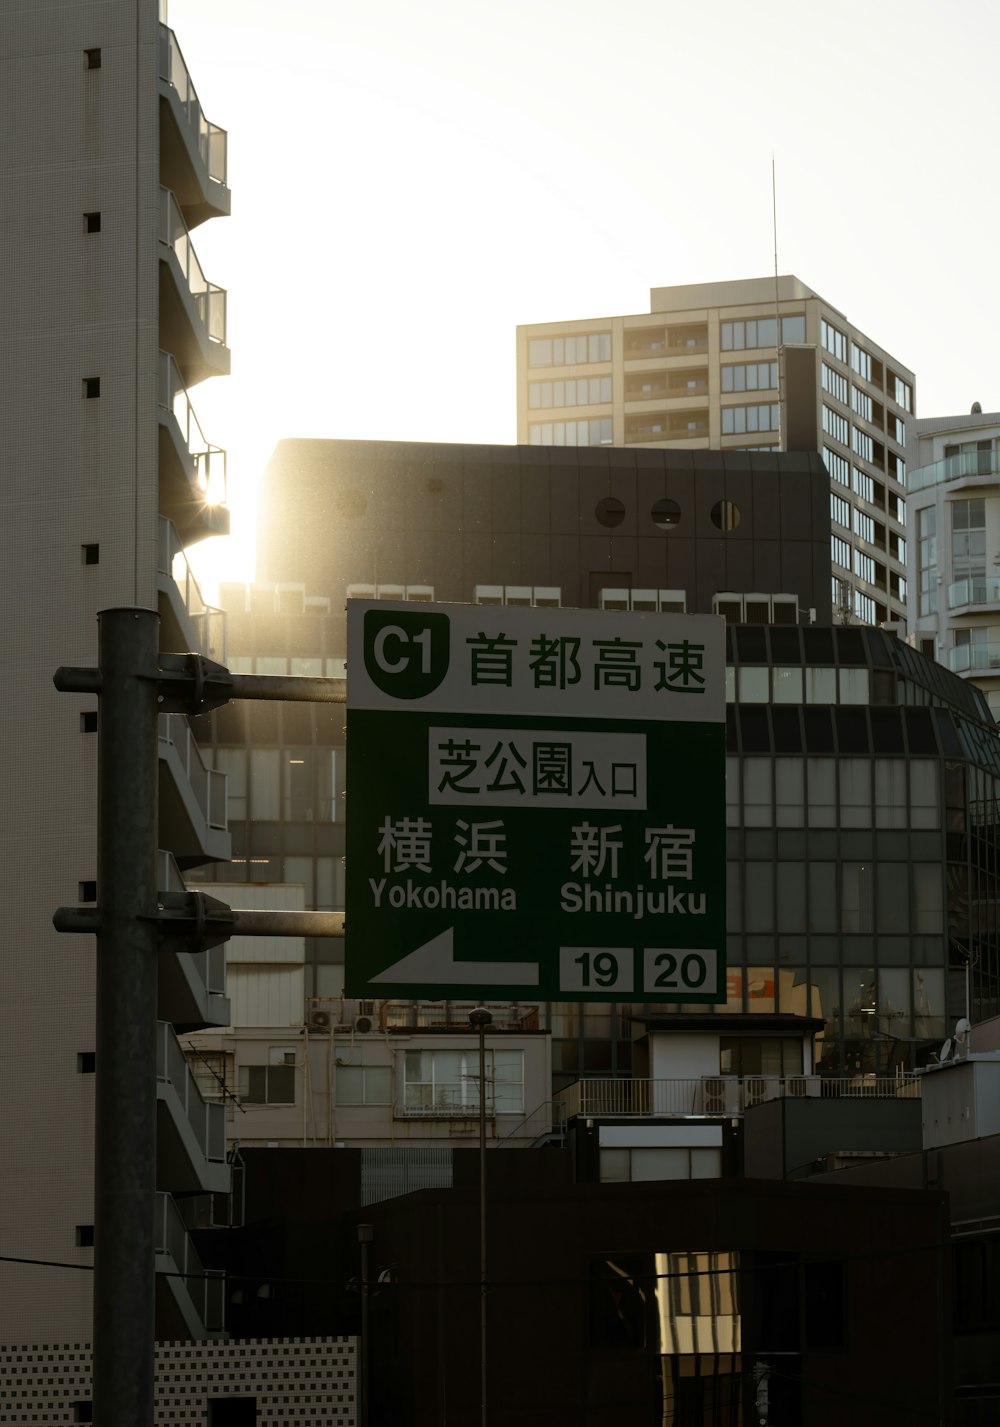 a street sign in a foreign language in front of a building